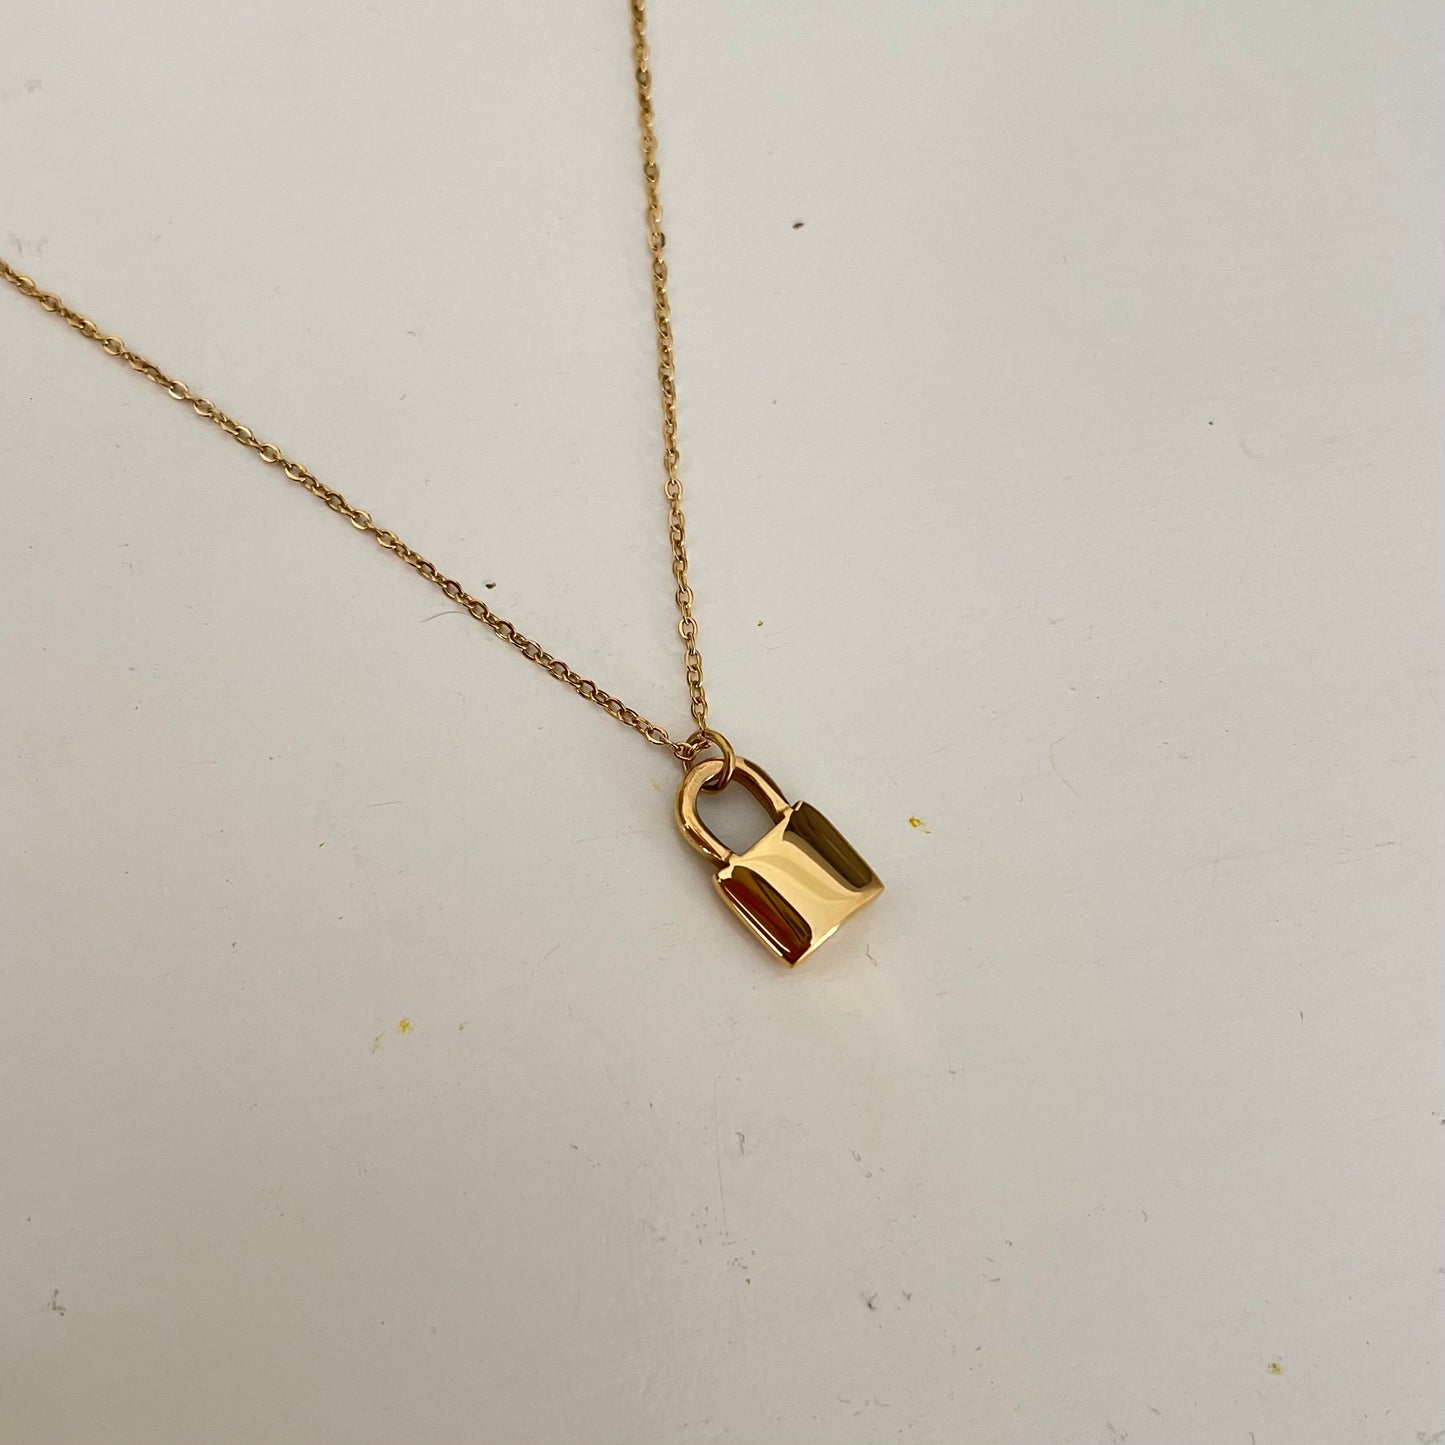 18KT Gold Plated Locked Away Lock Necklace